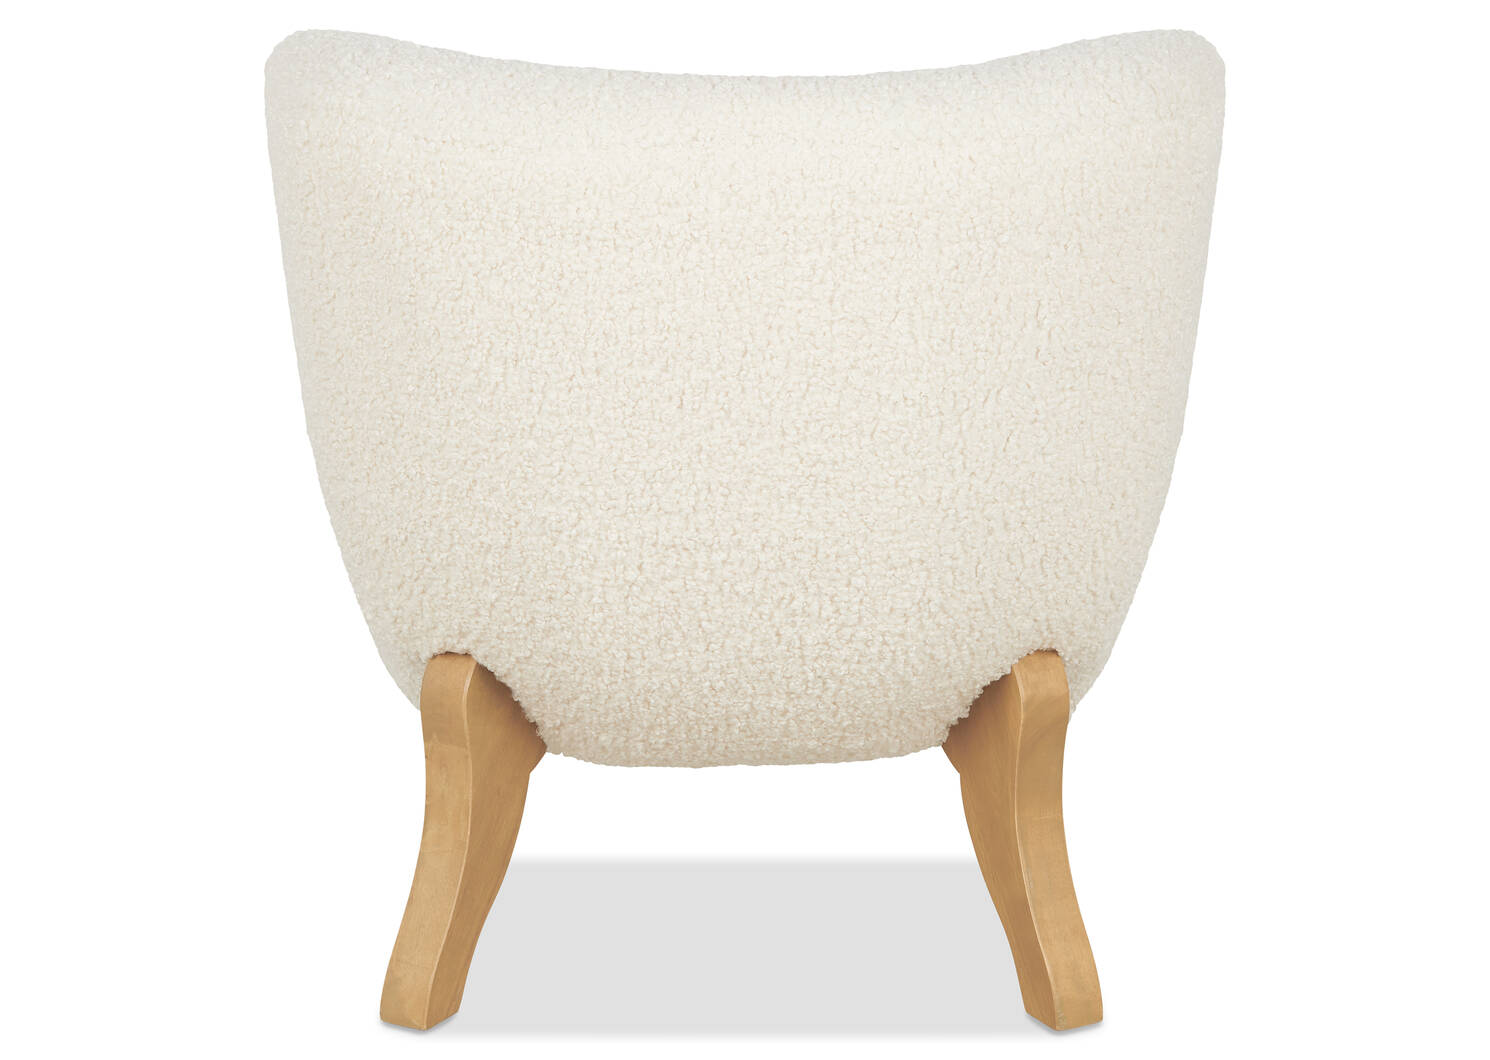 Fauteuil Emmy -Woolly ivoire